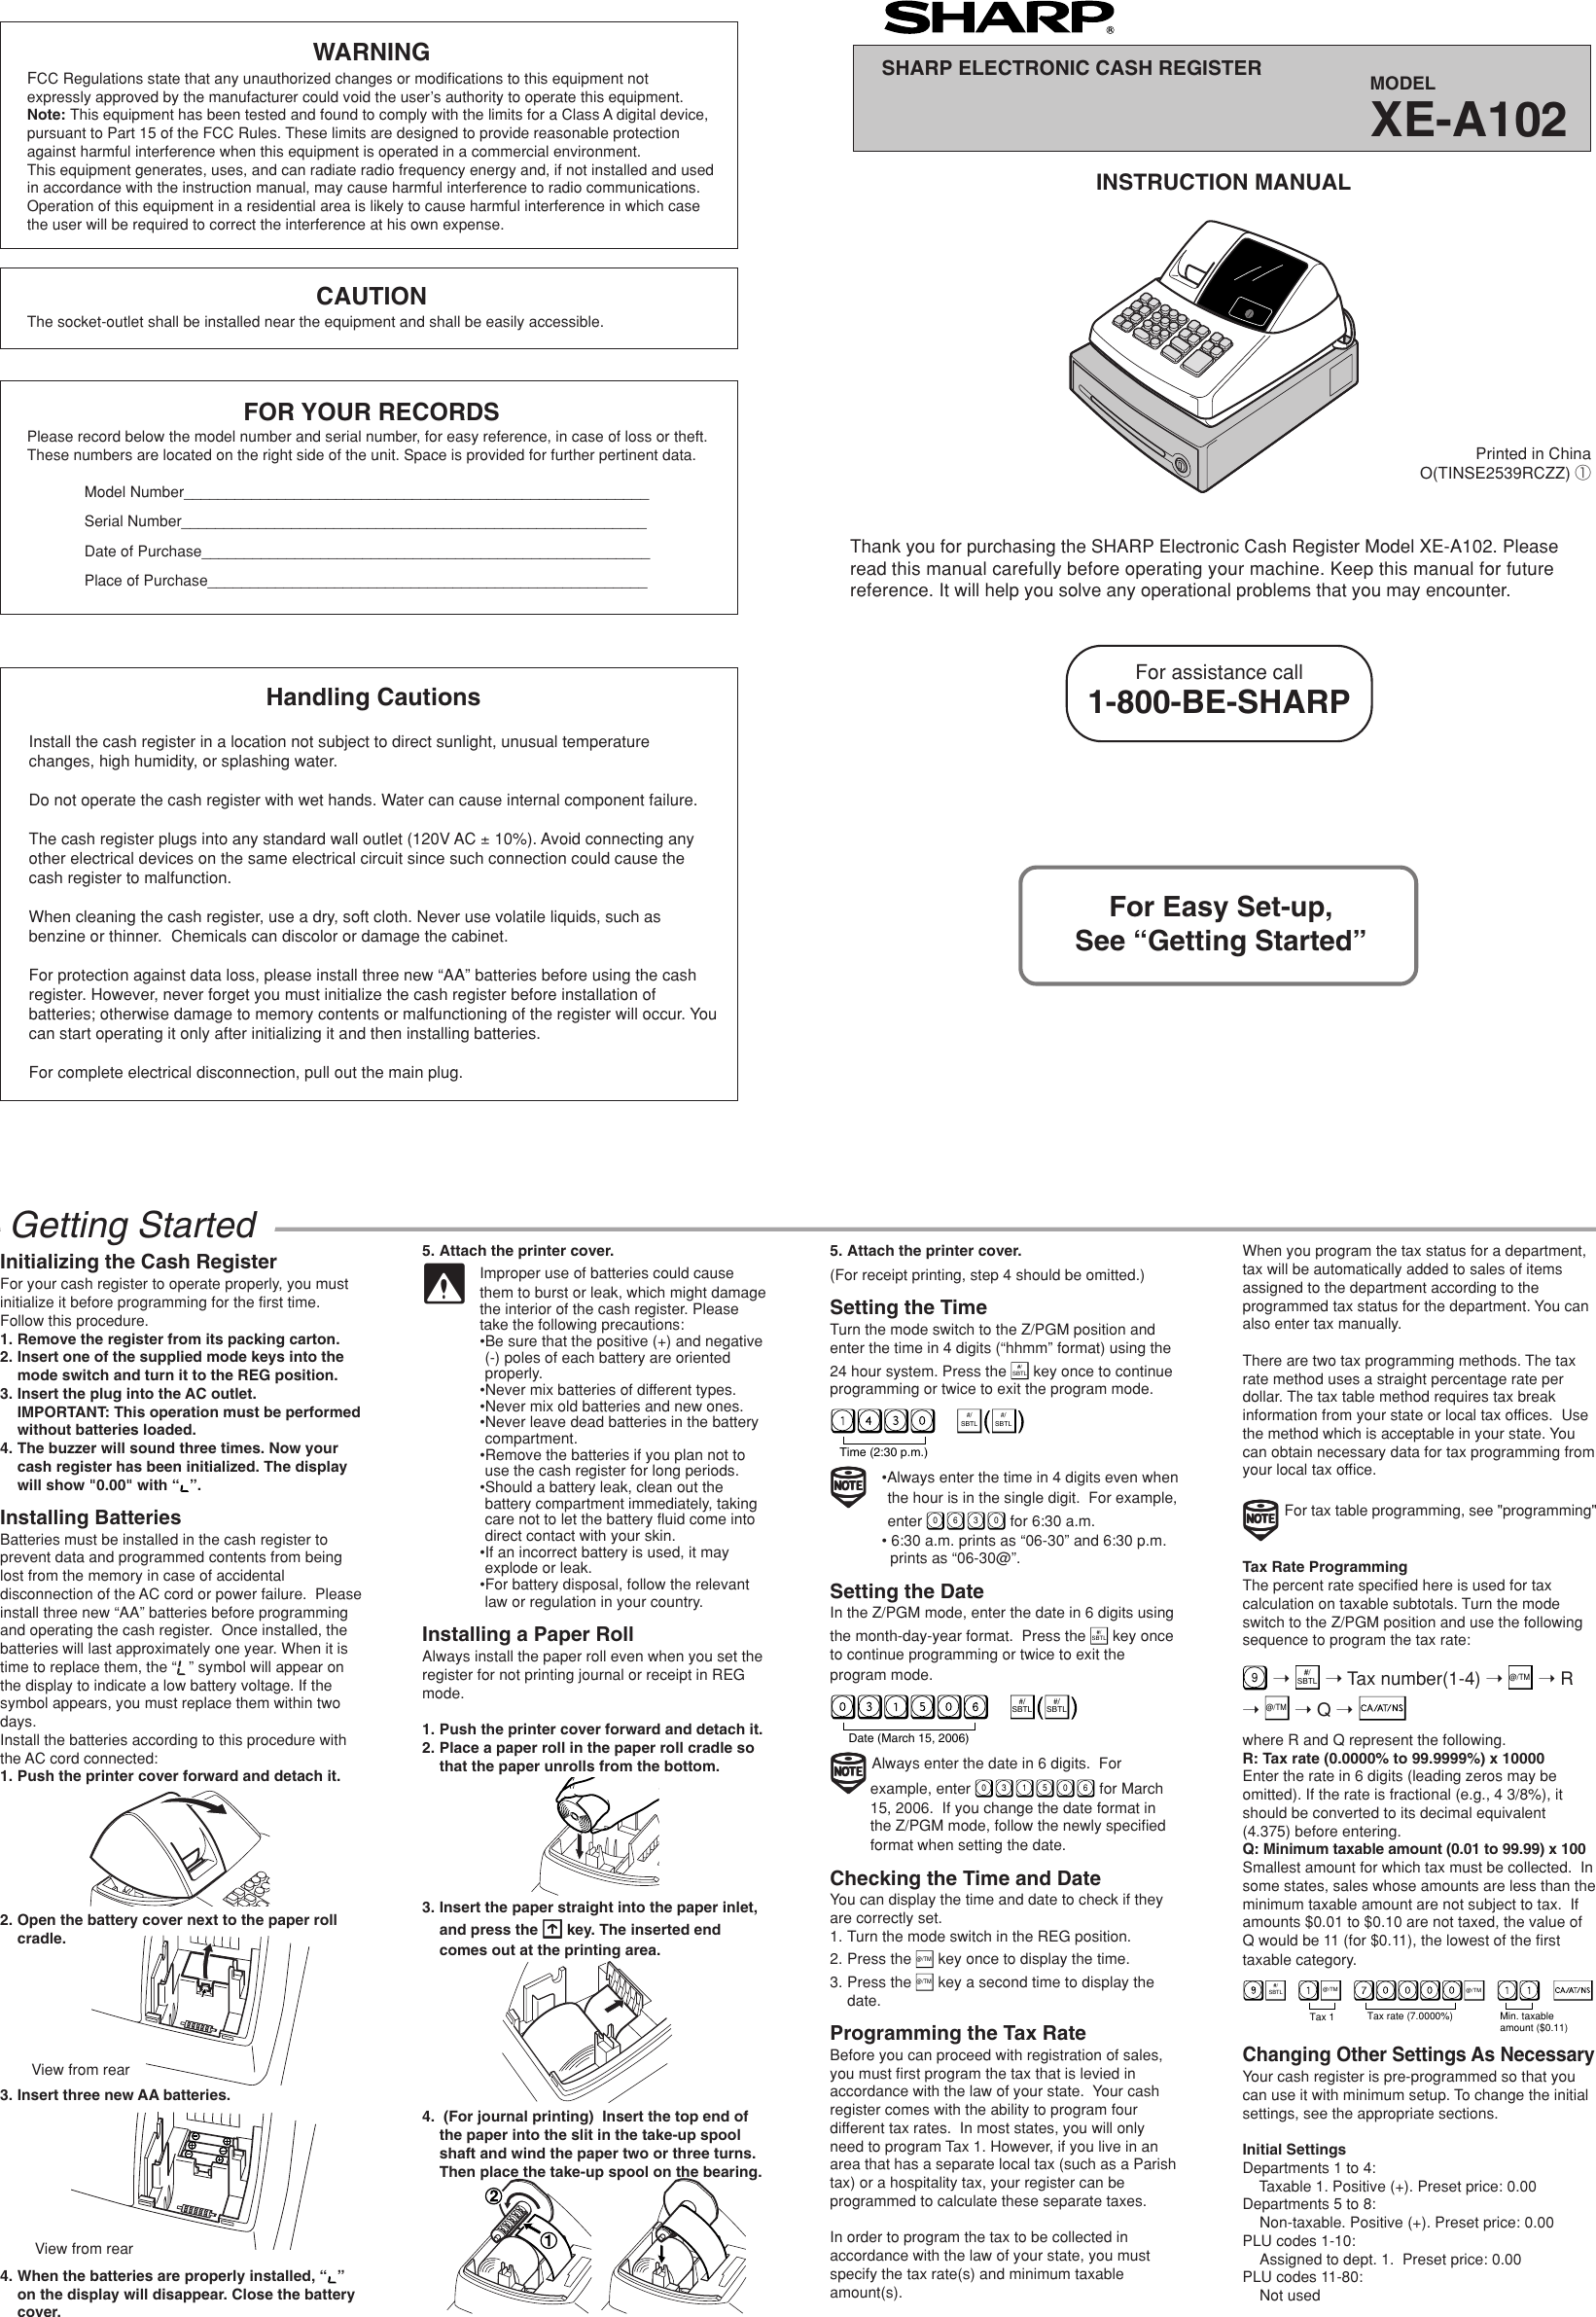 Page 1 of 6 - Sharp Sharp-Xe-A102-Owners-Manual- XE-A102 Operation Manual  Sharp-xe-a102-owners-manual